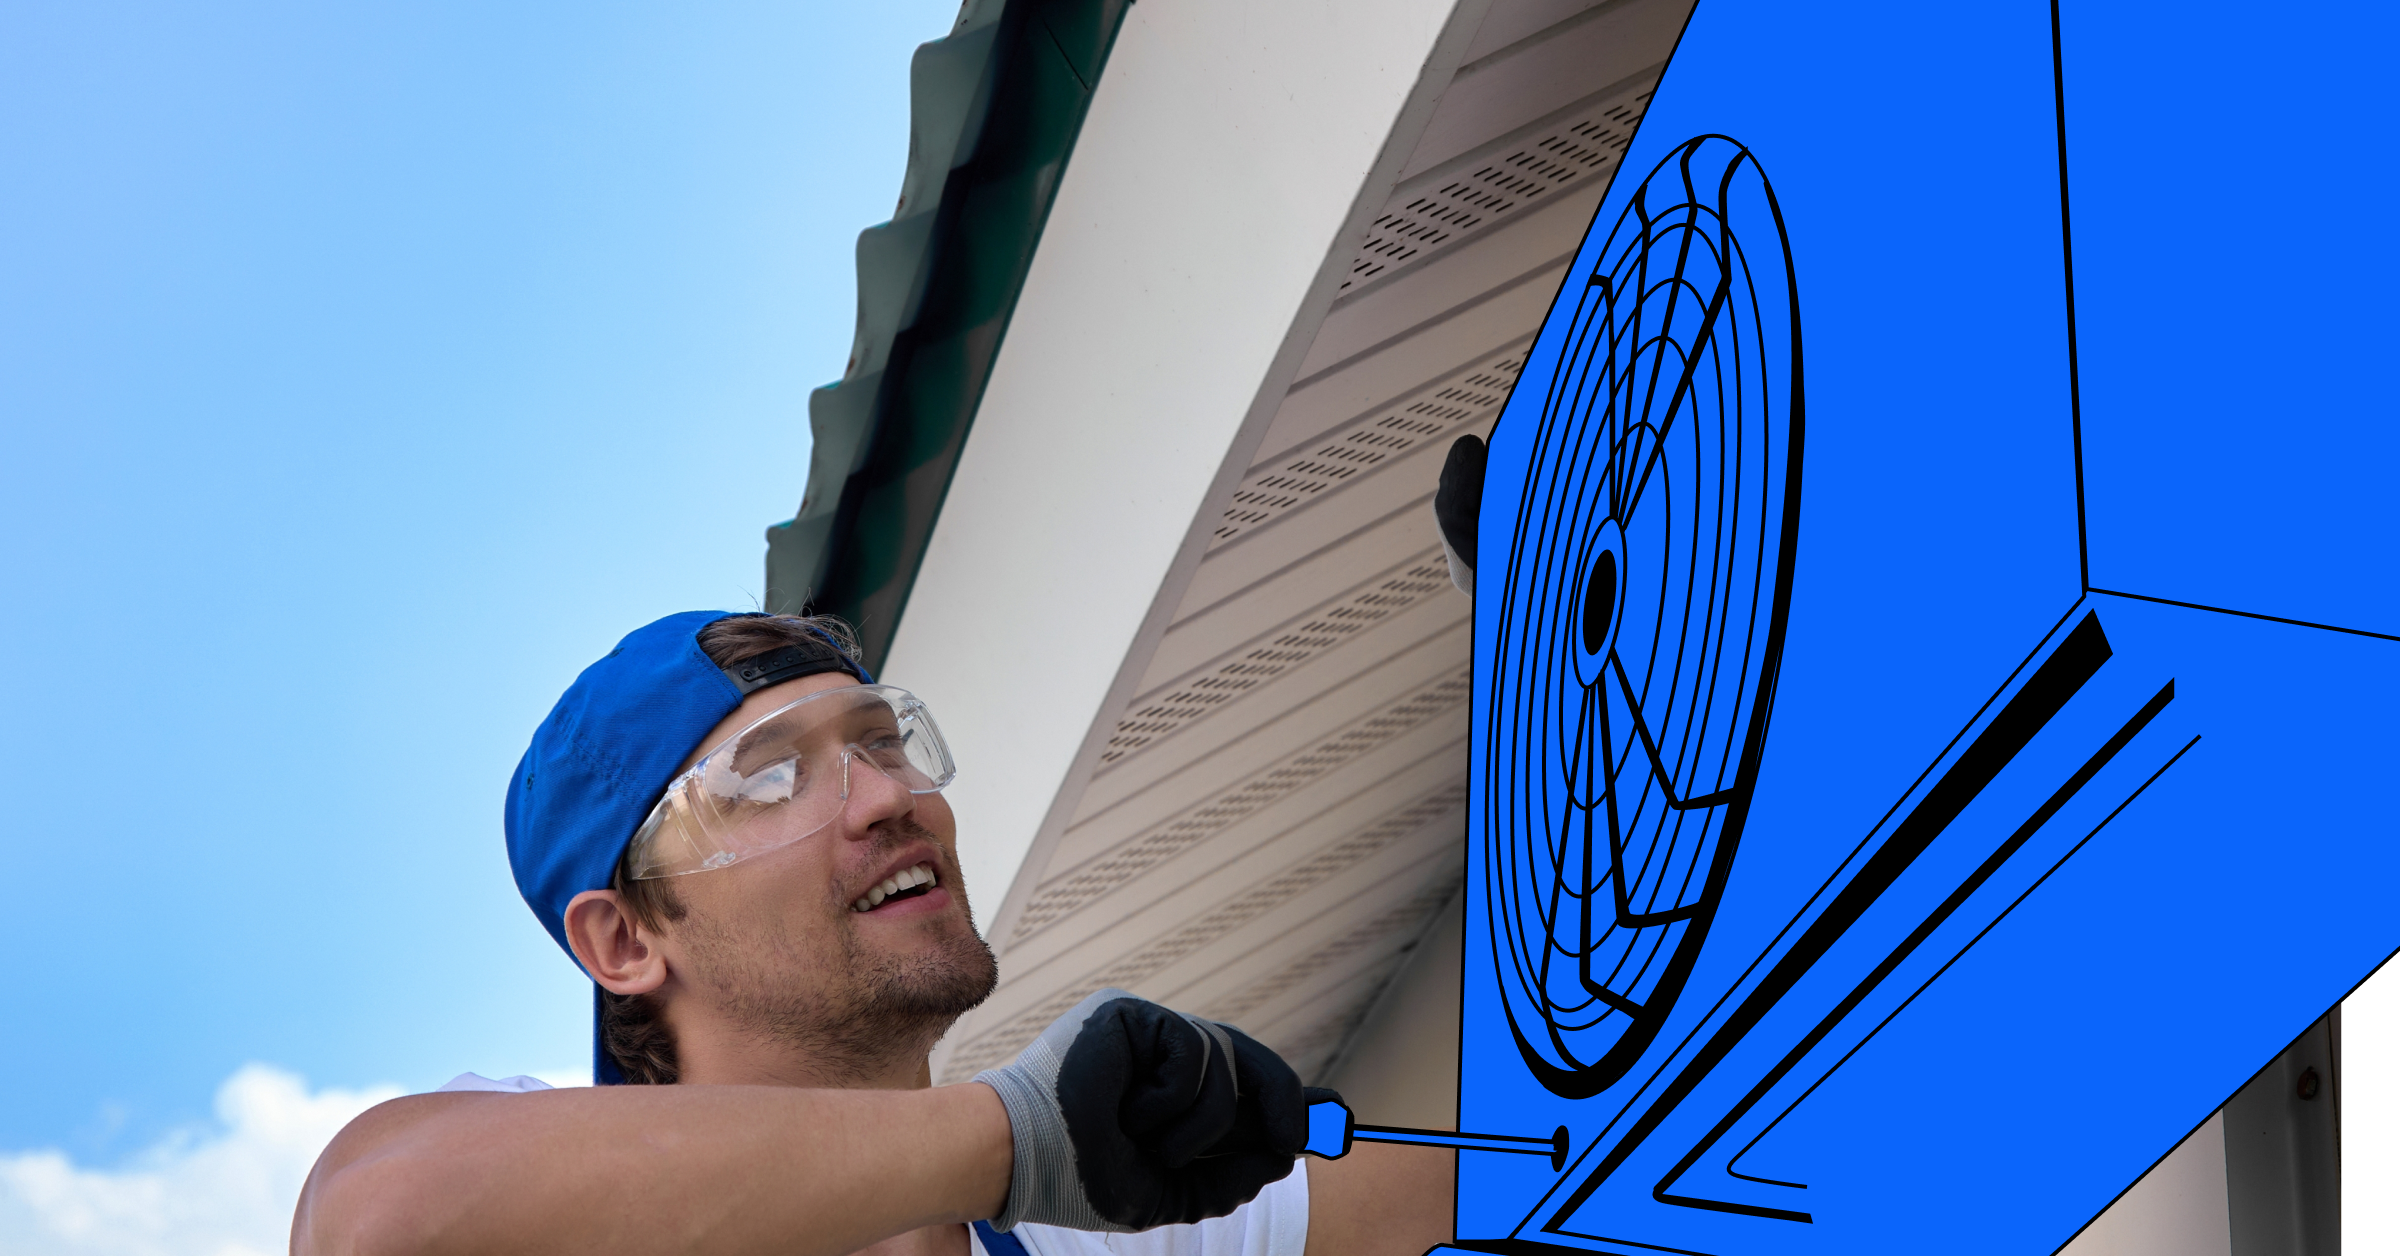 A professional installing an air conditioner, representing local air conditioning installation services.